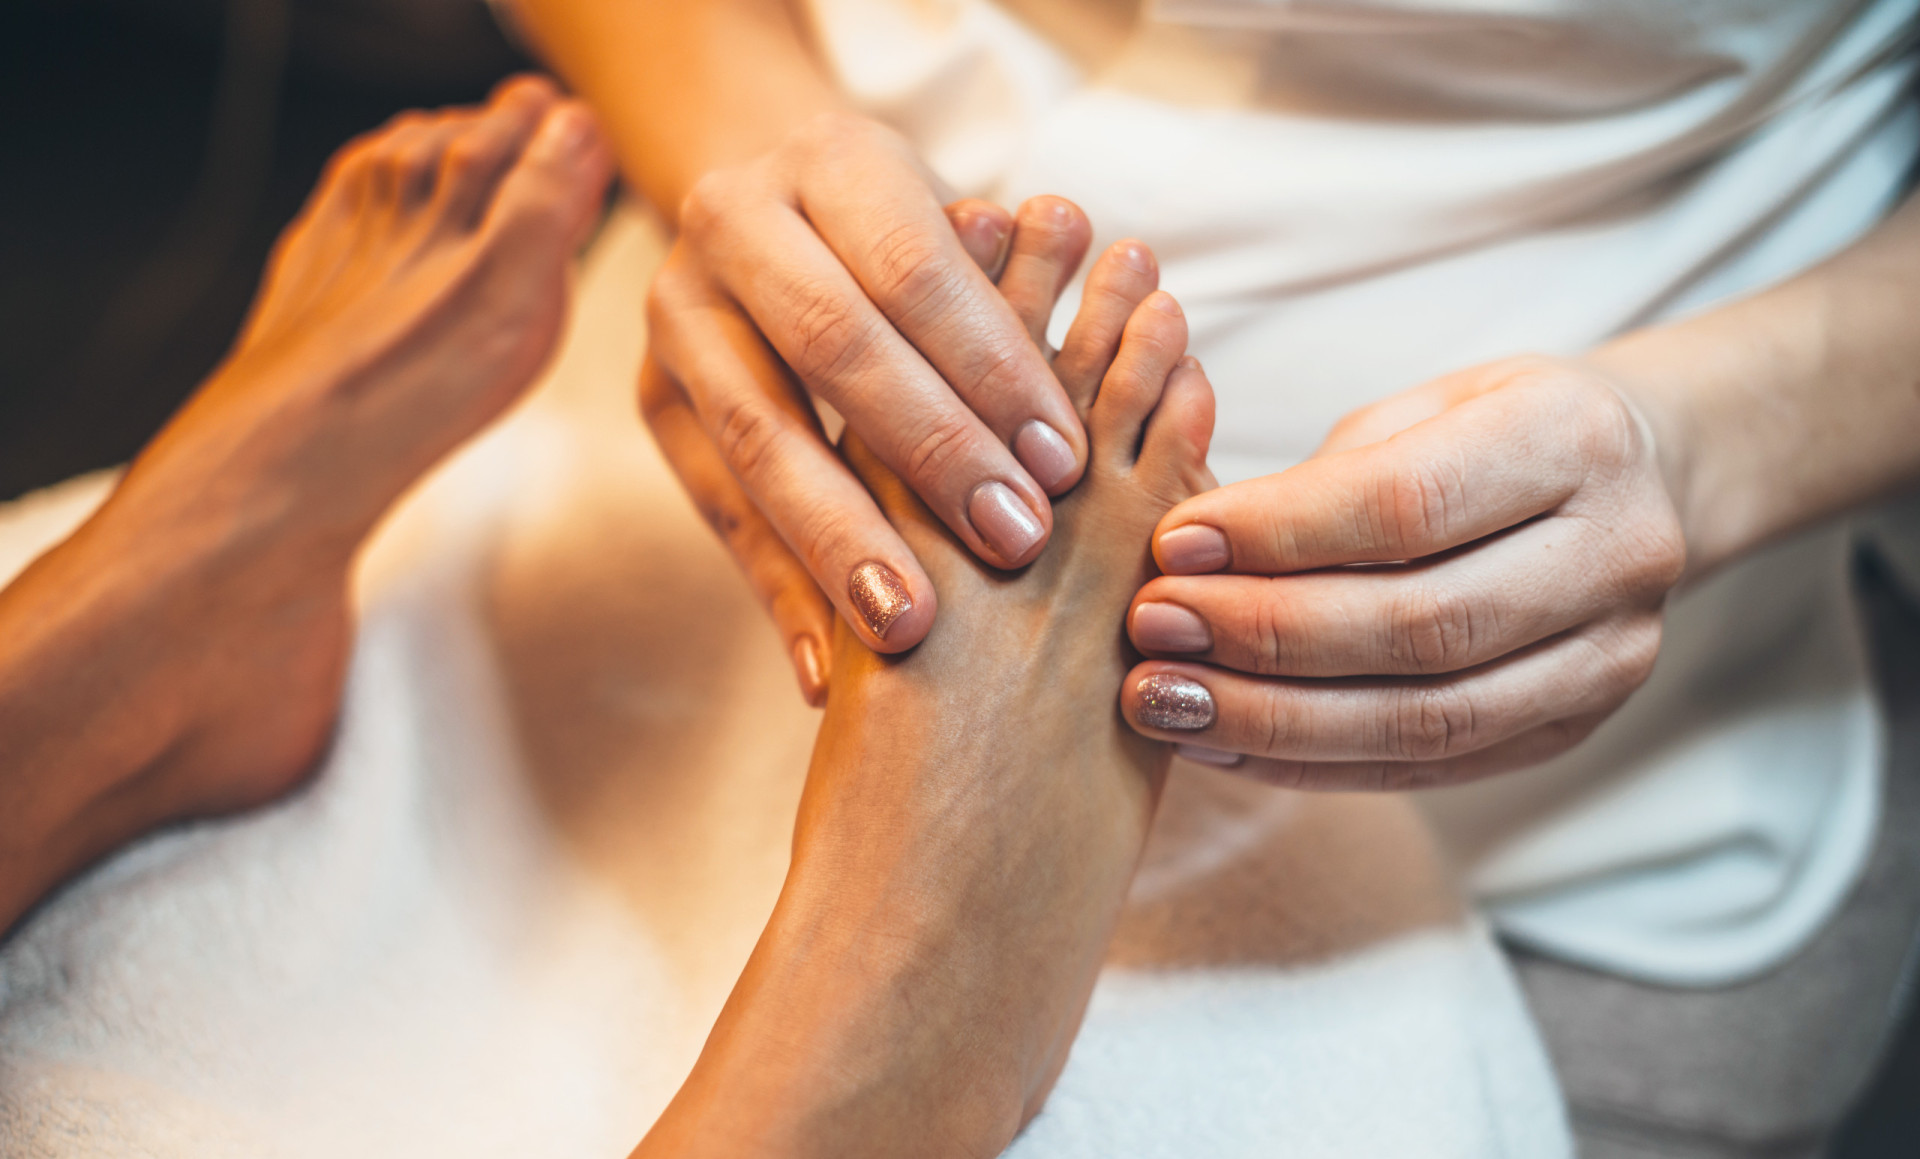 <p>Make sure to choose a reflexologist who is properly trained and qualified. If you notice any red flags or feel uncomfortable for any reason, it's okay to stop the session.</p> <p>Sources: (Verywell Health) (Healthline) </p> <p>See also: <a href="https://www.starsinsider.com/lifestyle/522057/the-mystical-and-powerful-plants-of-ancient-medicine">The mystical and powerful plants of ancient medicine</a></p>